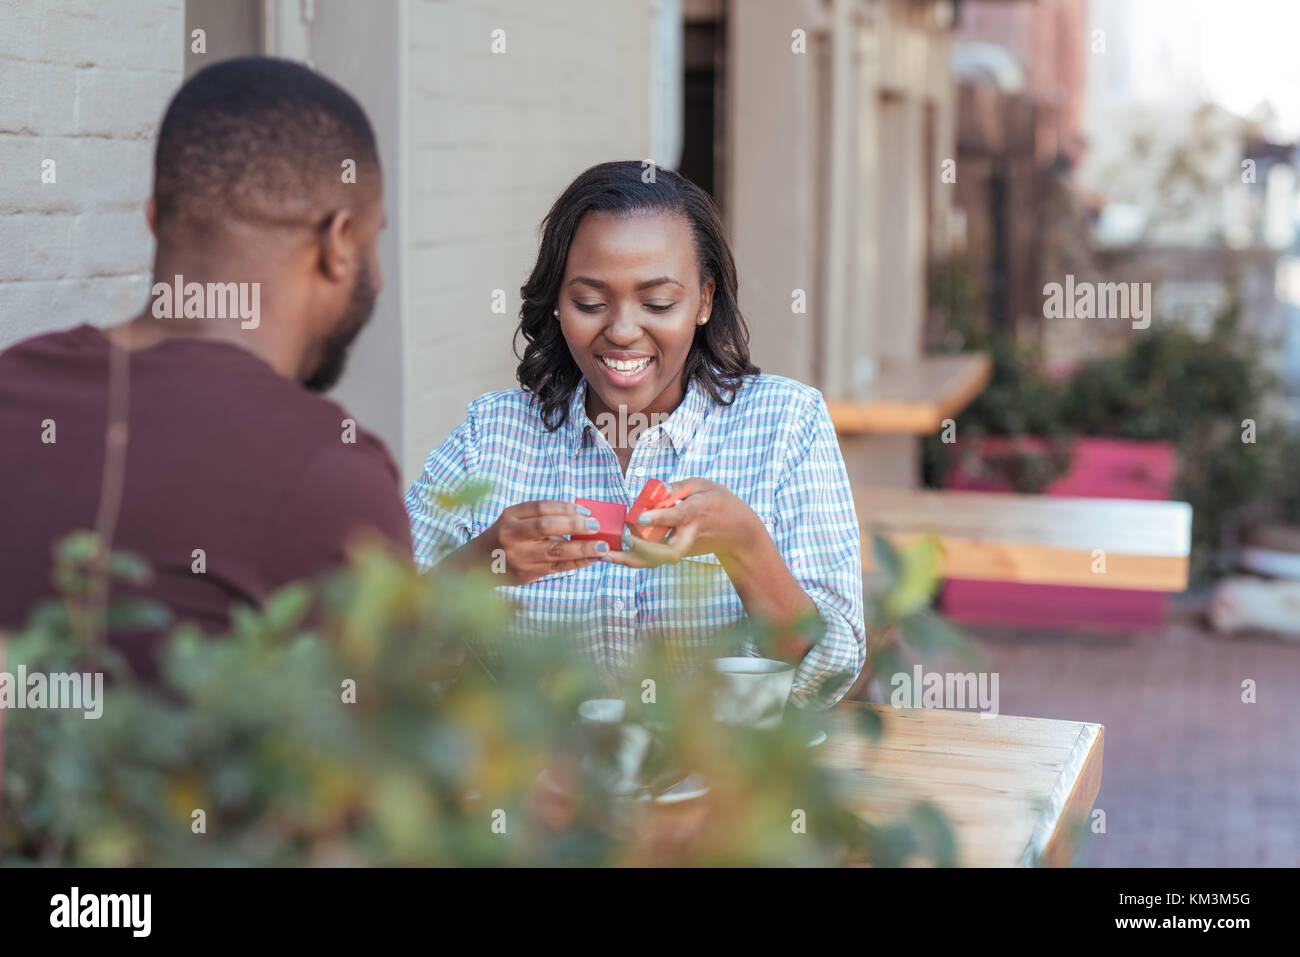 Smiling young African woman opening a present from her boyfriend Stock Photo